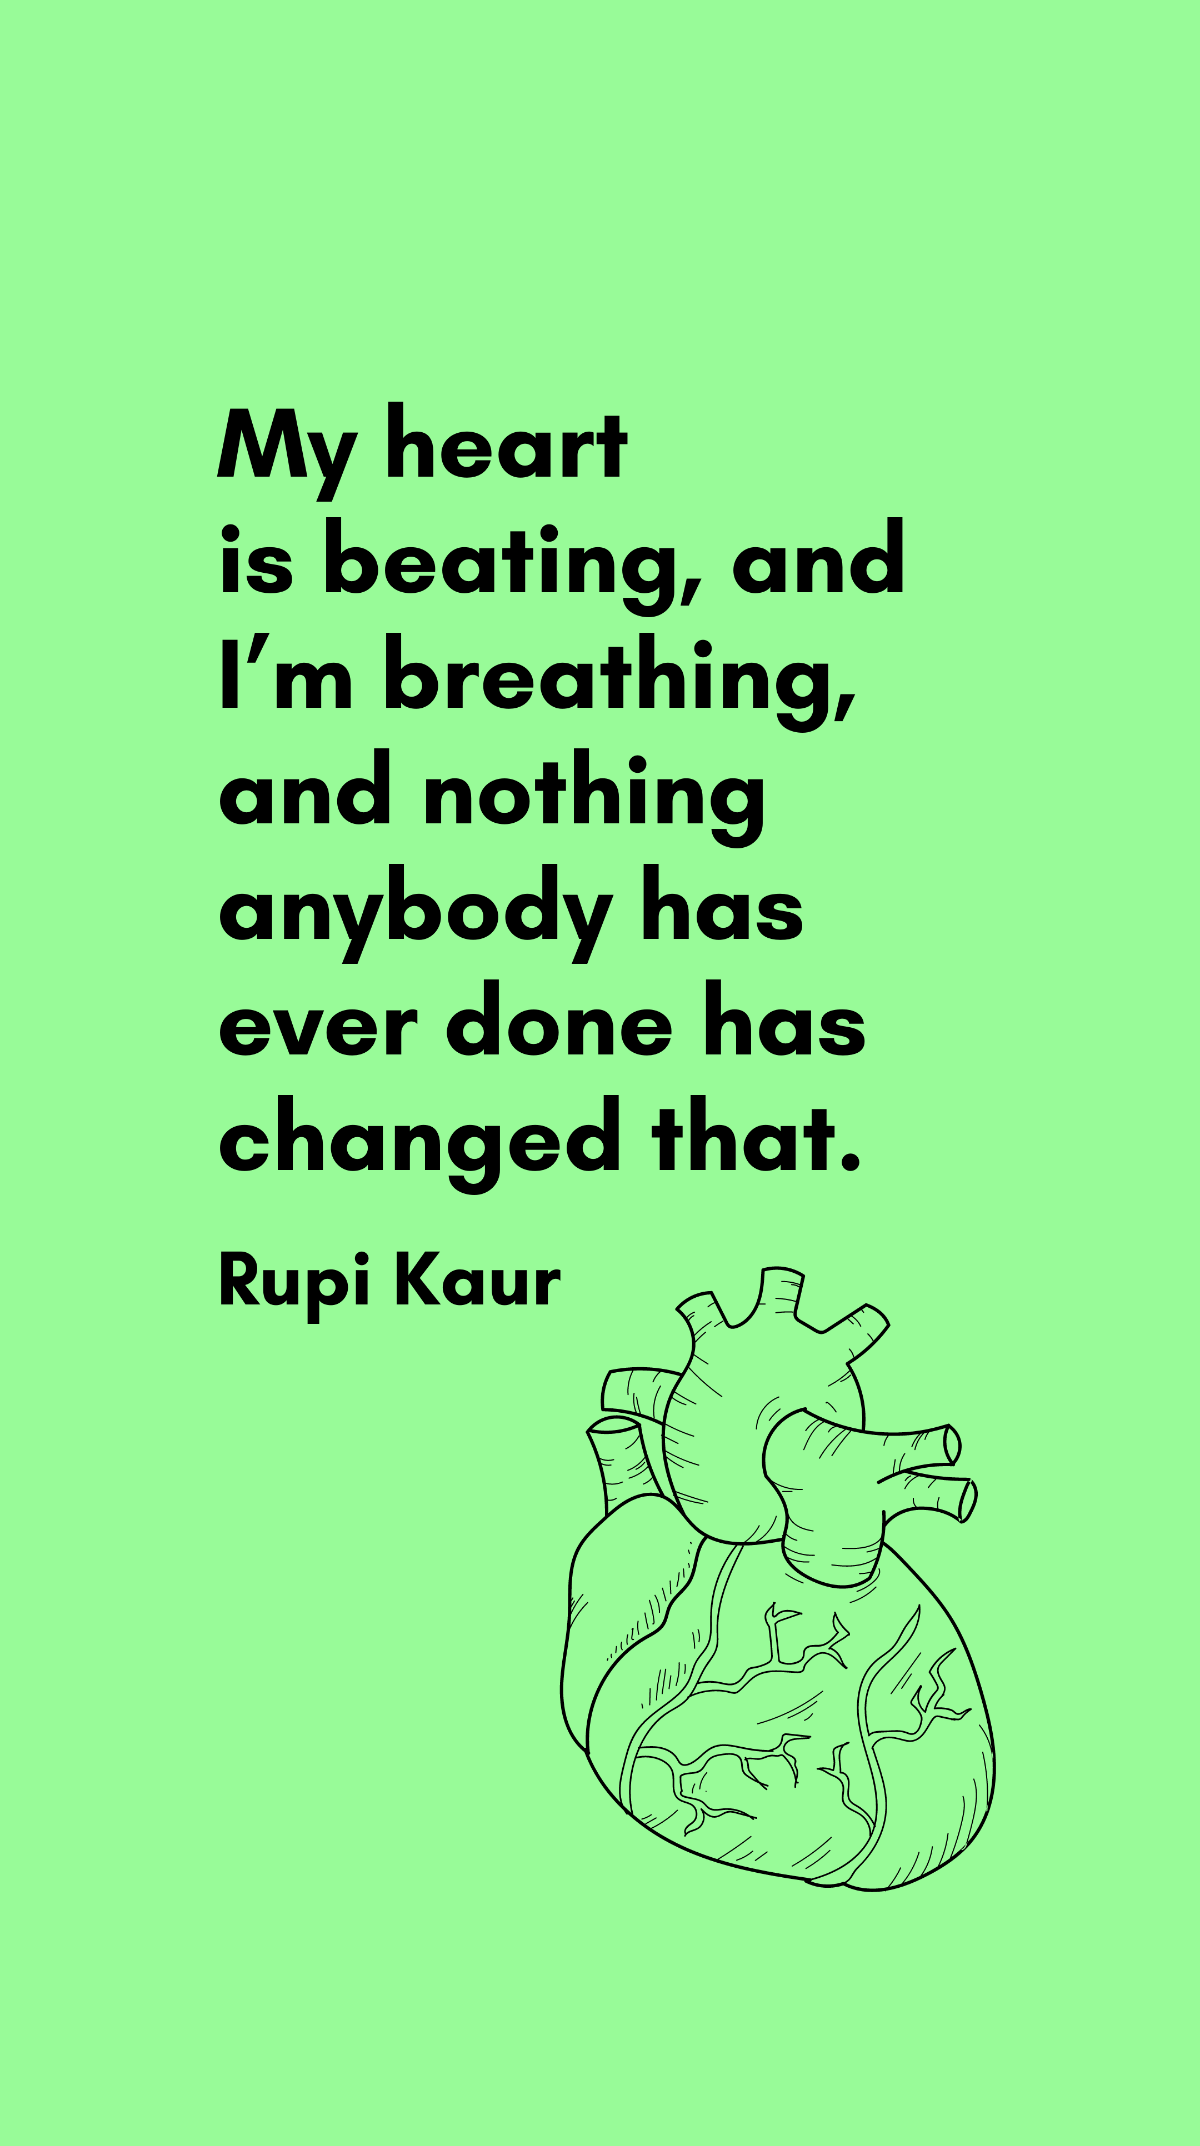 Free Rupi Kaur - My heart is beating, and I’m breathing, and nothing anybody has ever done has changed that. Template